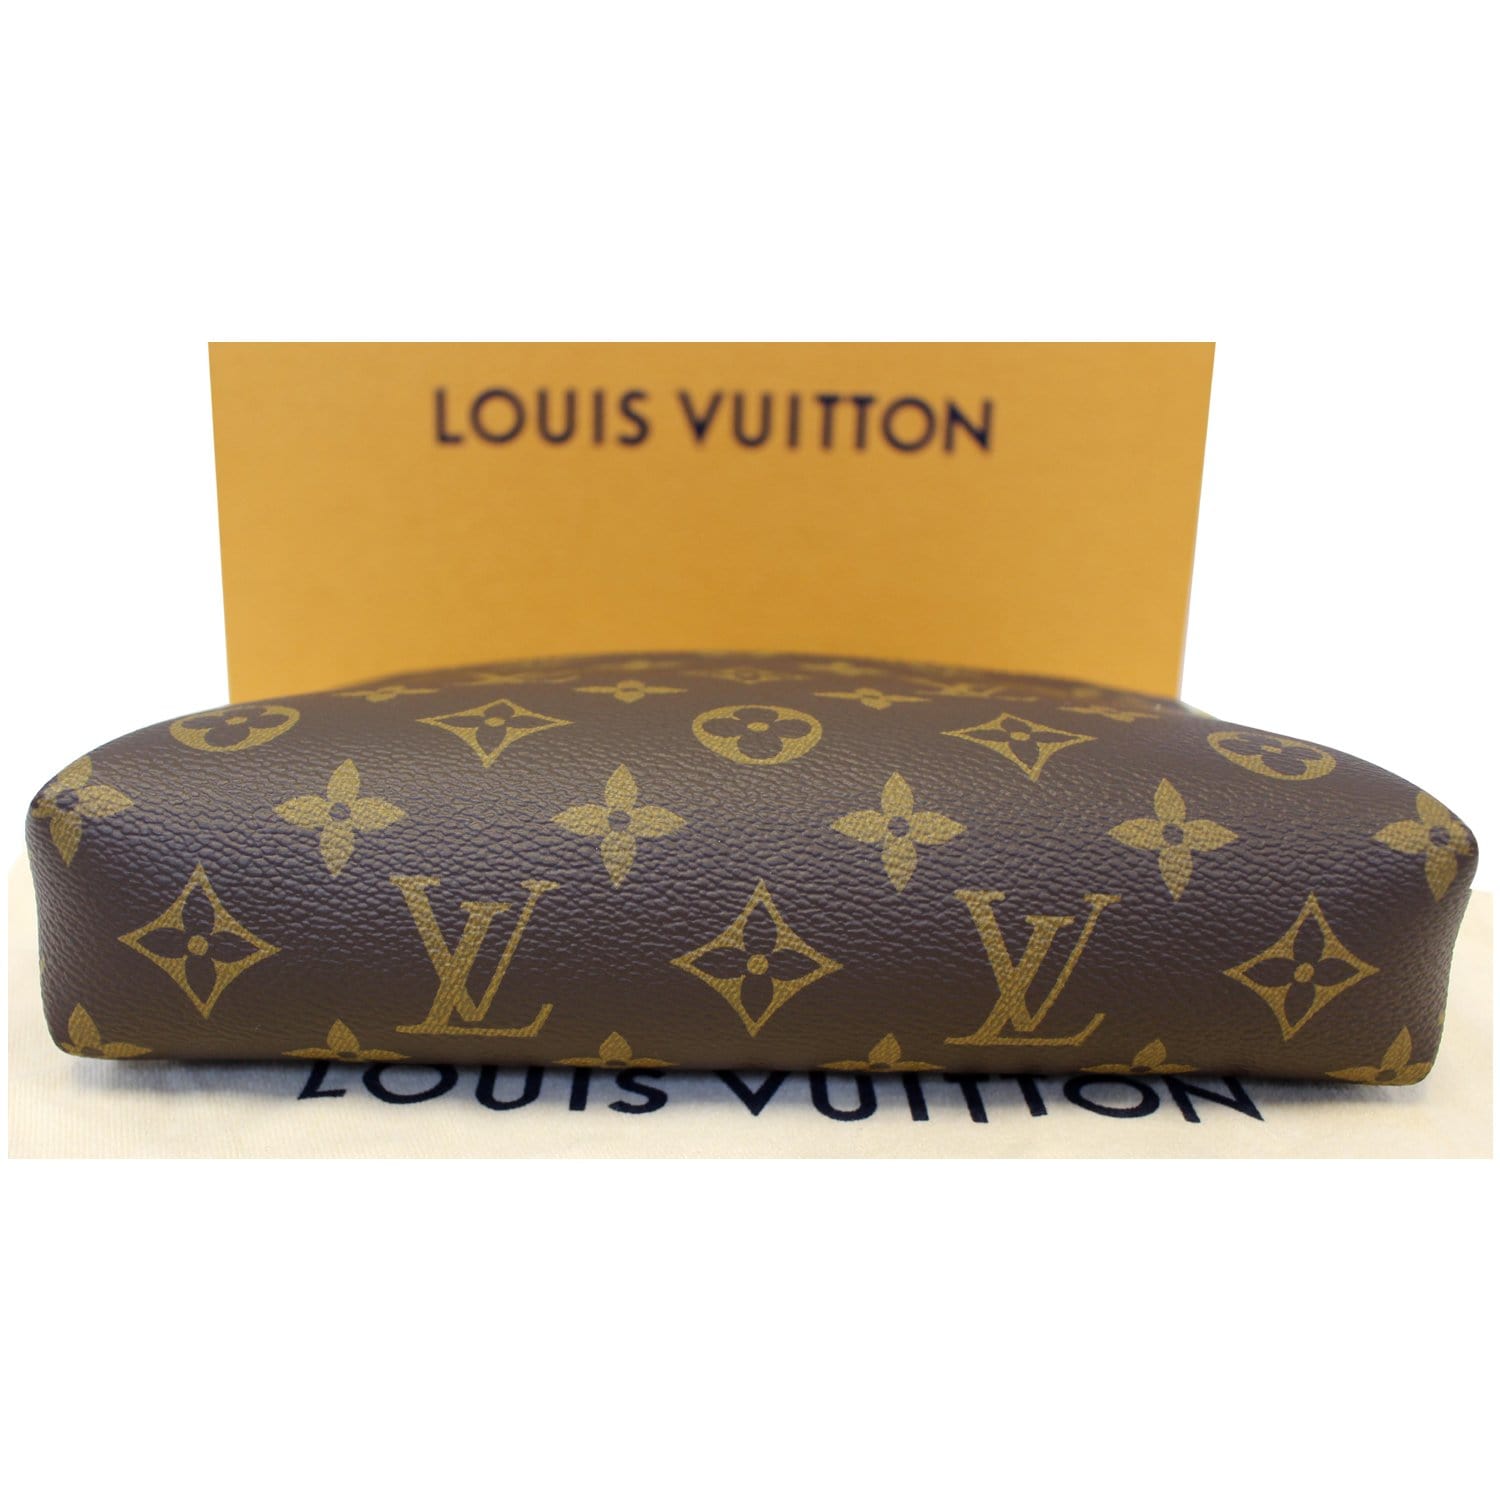 How to Tell if a Louis Vuitton Pallas Is Authentic or Fake